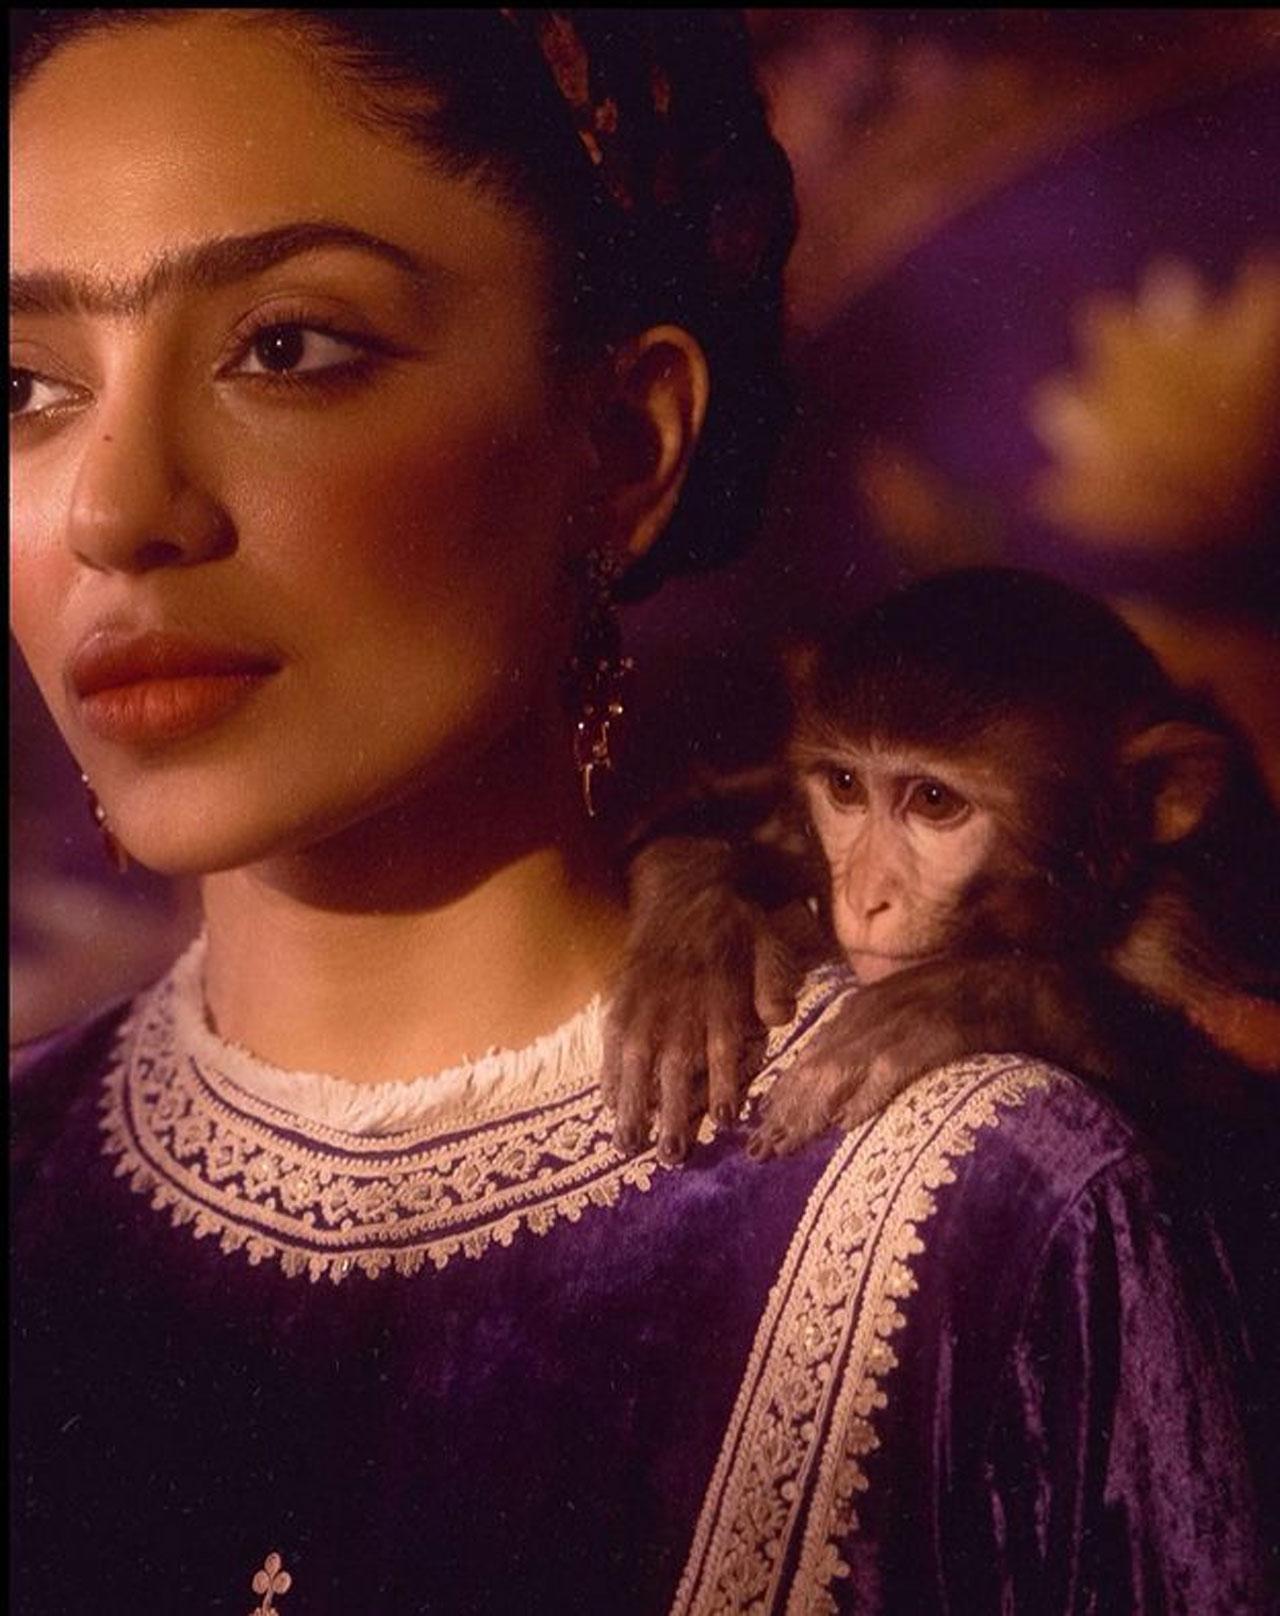 There is only Sobhita Dhulipala who is a perfect fit for putting up anything artistic like this of Frida Kahlo. The has always adapted different looks for her photoshoots which are unique and reflect the beauty of her desires.